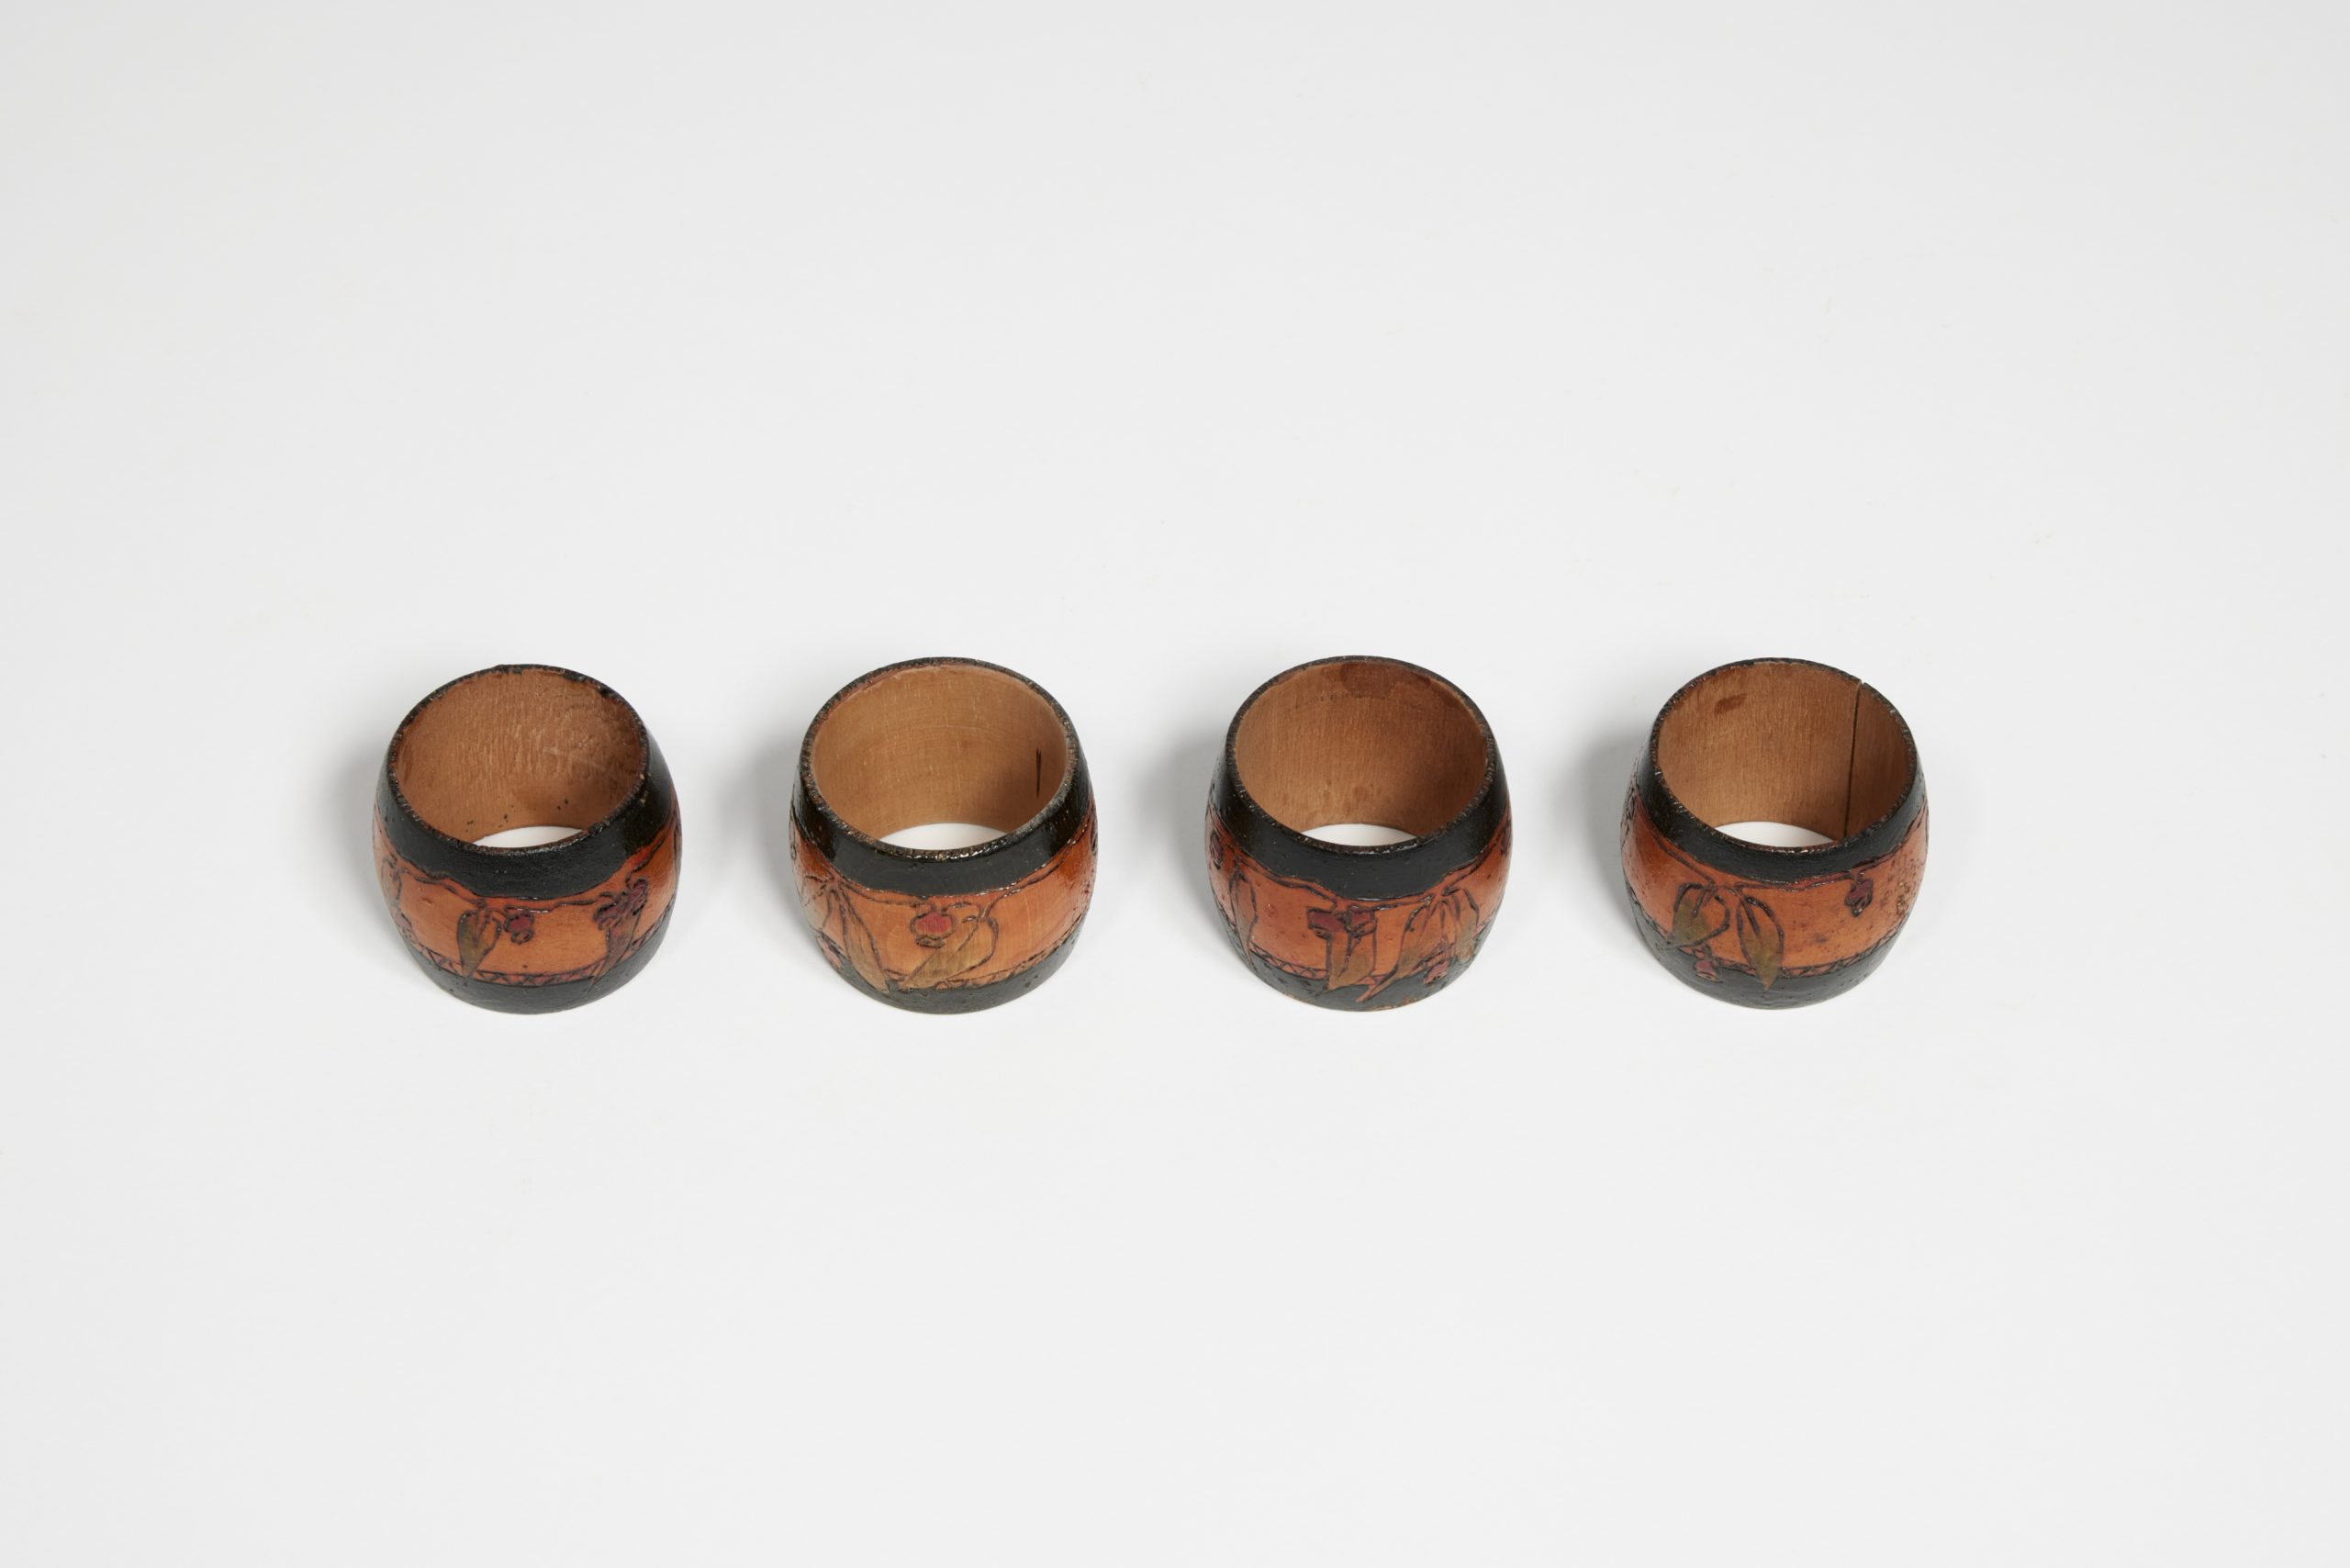 Four wooden napkin rings with gumnuts and black bands burned into them